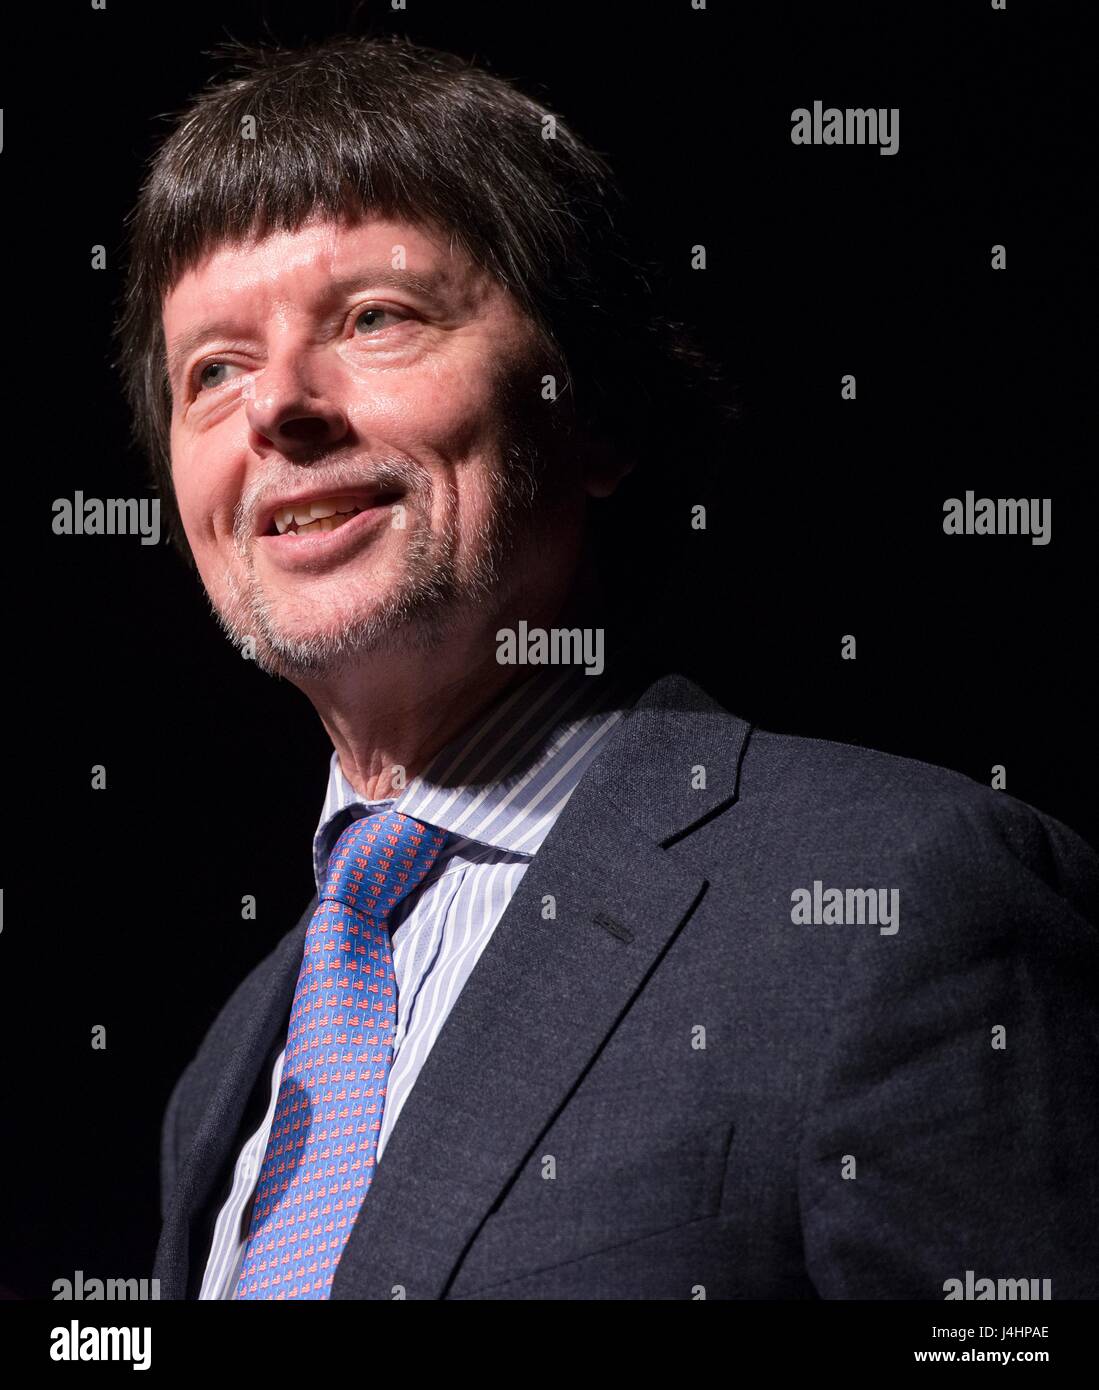 Documentary filmmaker Ken Burns speaks after a screening of his upcoming PBS documentary series The Vietnam War at the LBJ Presidential Library April 27, 2017 in Austin, Texas.     (photo by Jay Godwin/LBJ Presidential Library  via Planetpix) Stock Photo